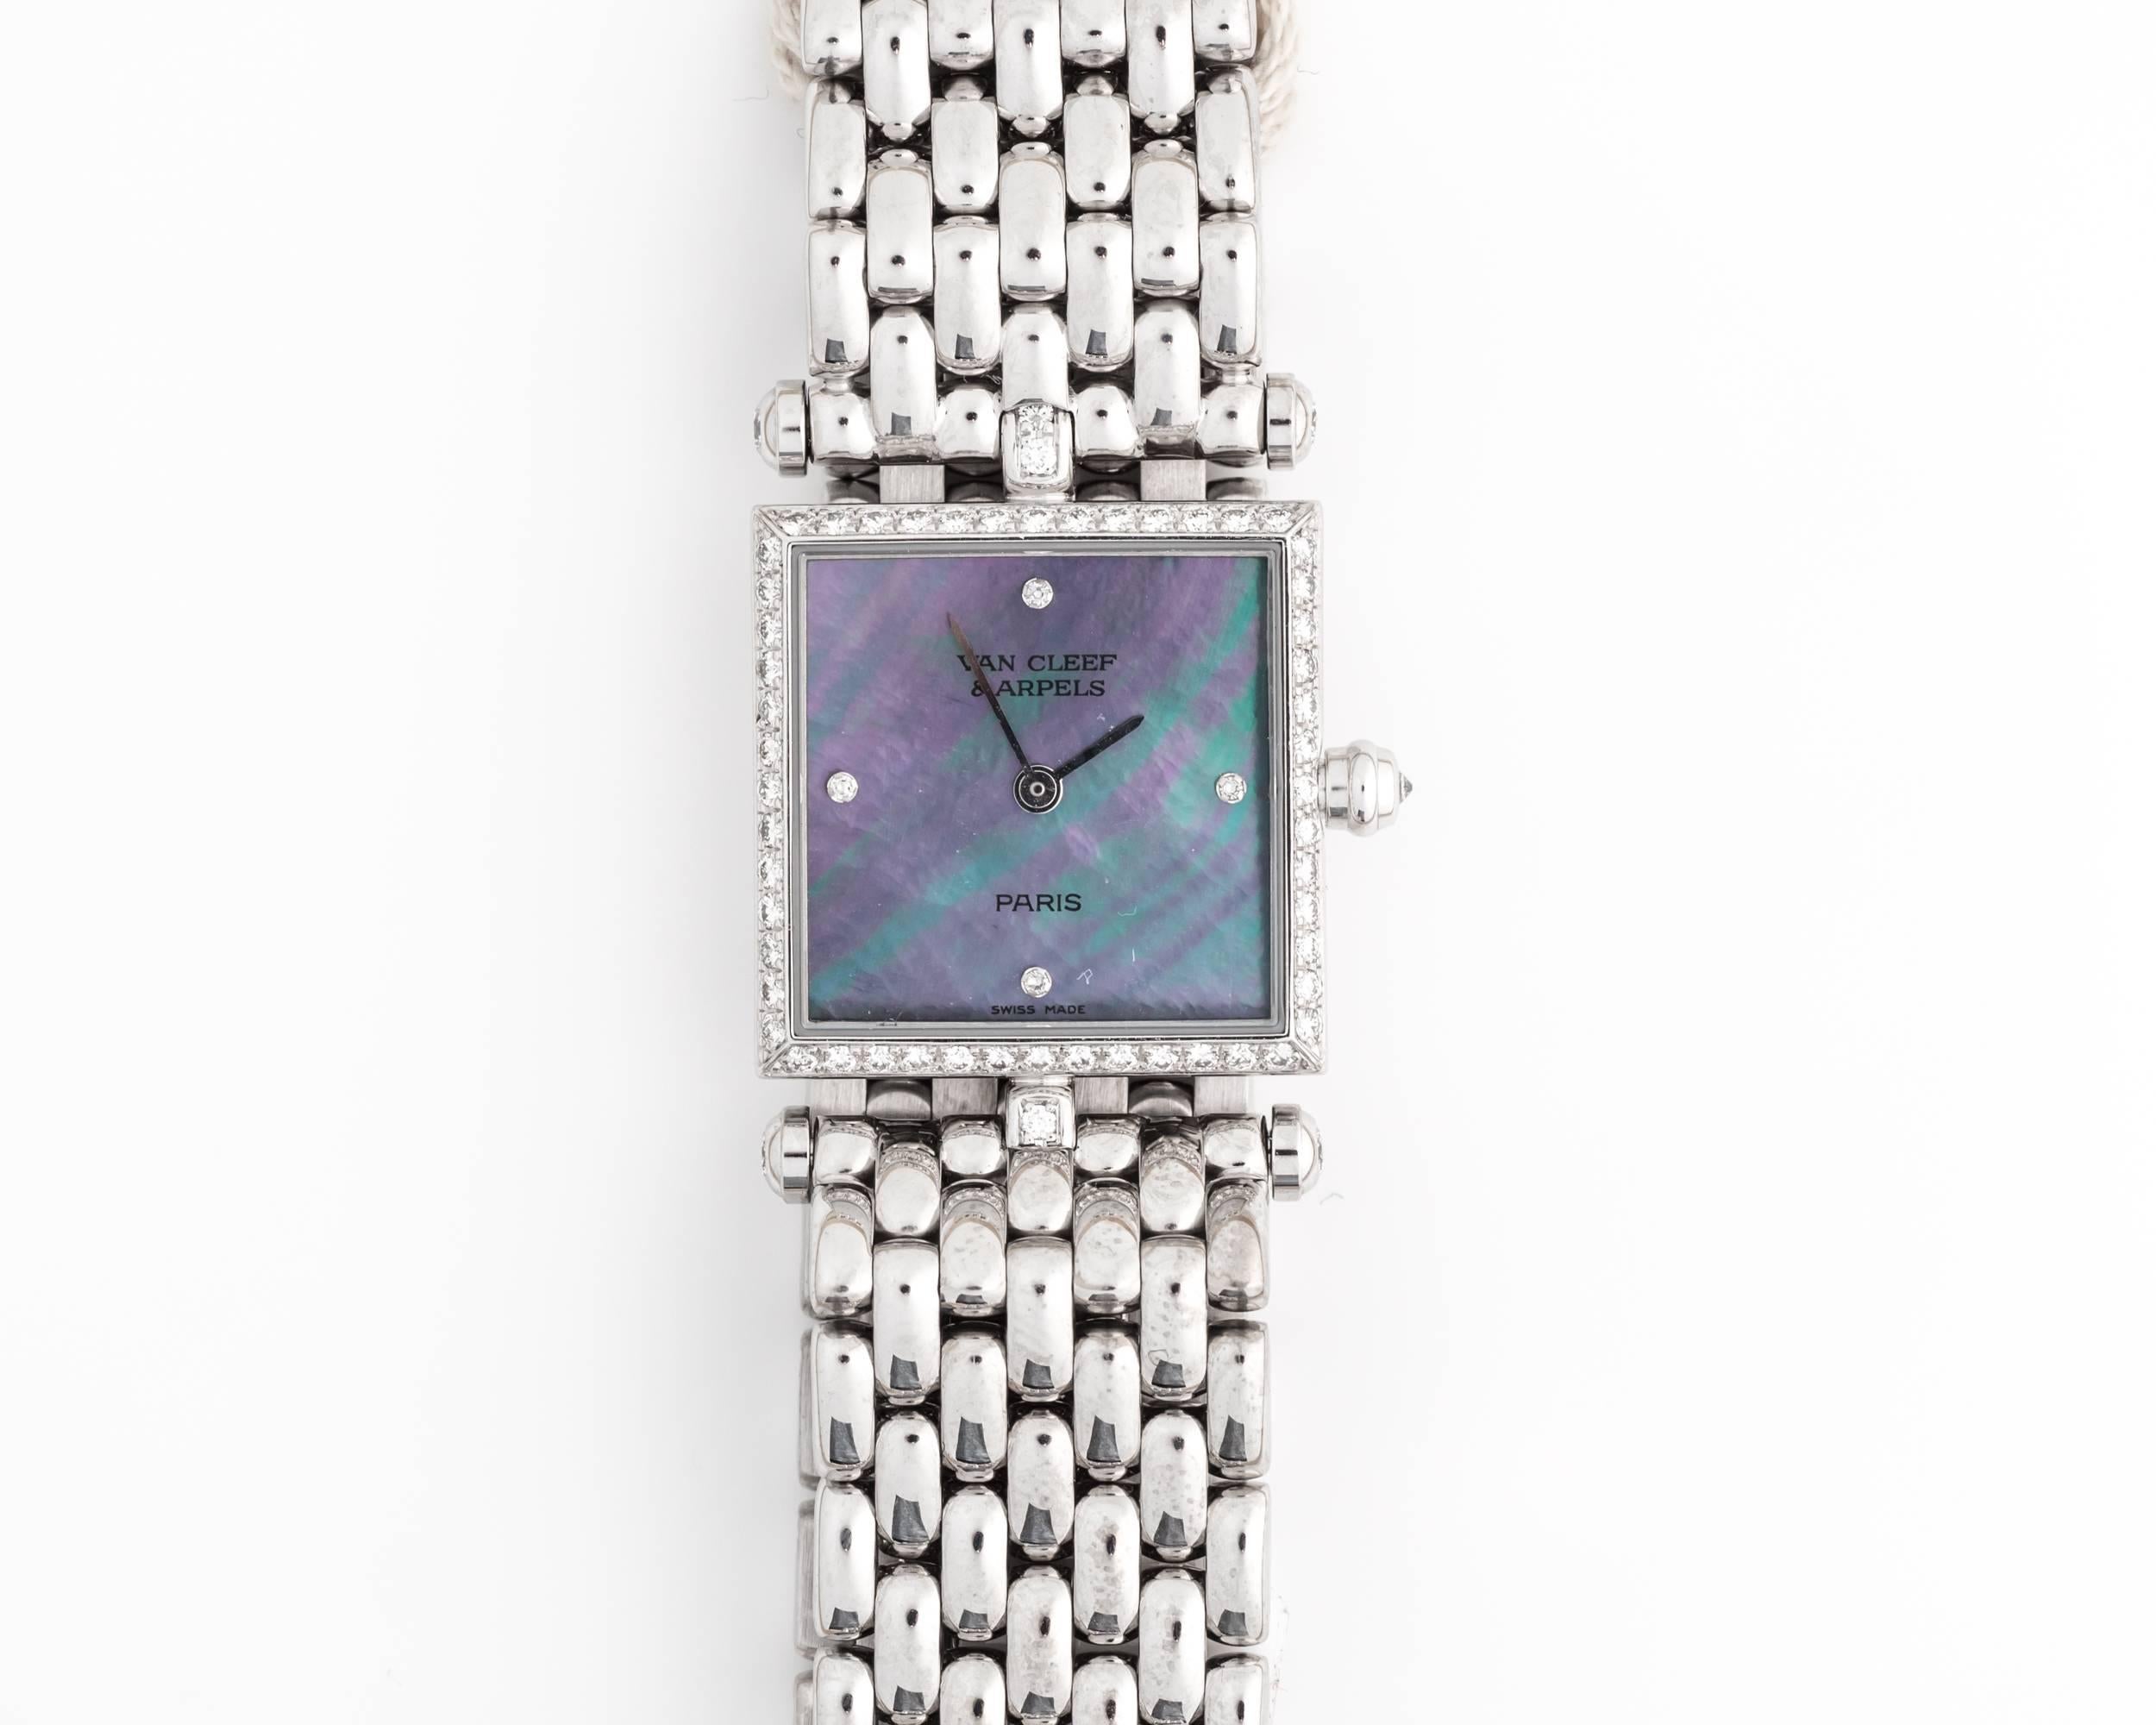 Beautiful Van Cleef & Arpels watch, unique and rare combination.
Watch features Tahitian Mother of Pearl dial and 4 diamonds at 3, 6, 9 and 12 o'clock position; additionally, embellished with a diamond bezel. 18K White Gold Bracelet with double